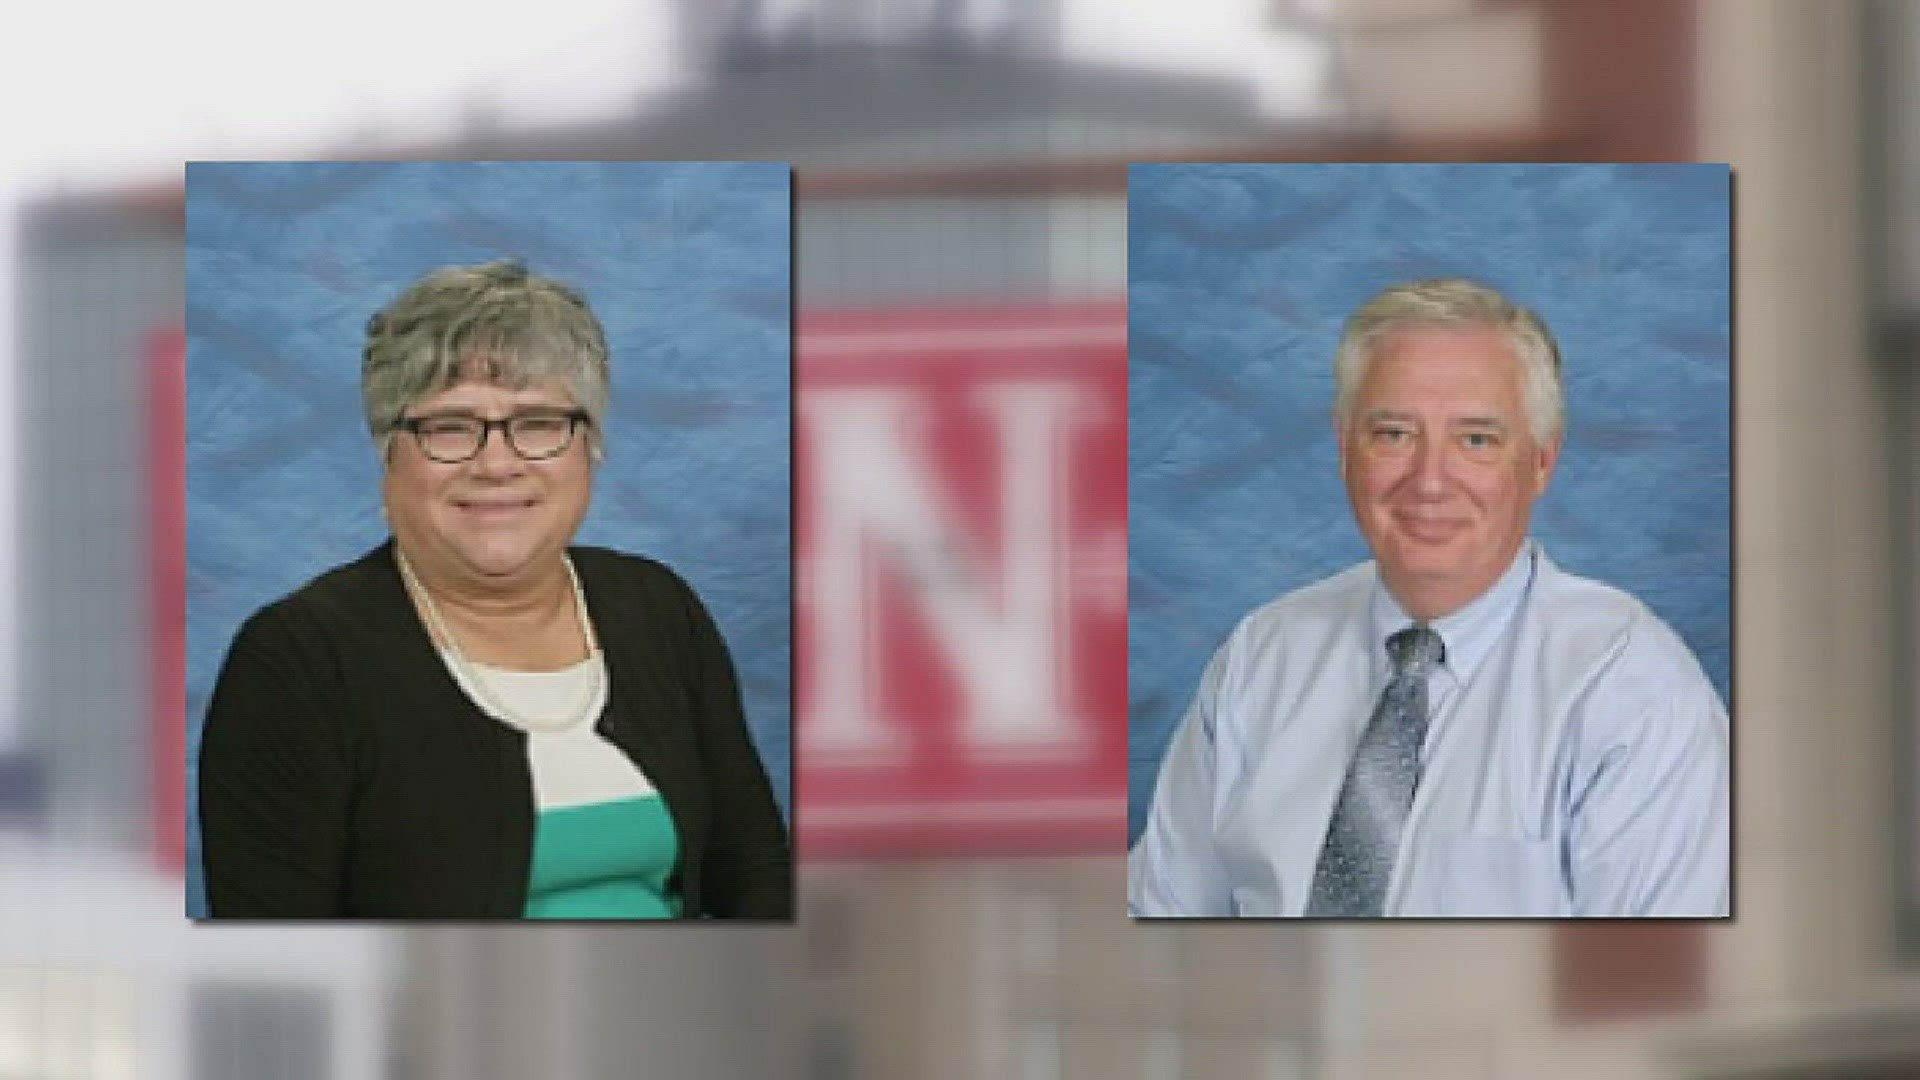 A Knox County Schools spokesperson confirmed Principal Becky Ashe and Vice Principal Tim Childers have been placed on leave pending an investigation.